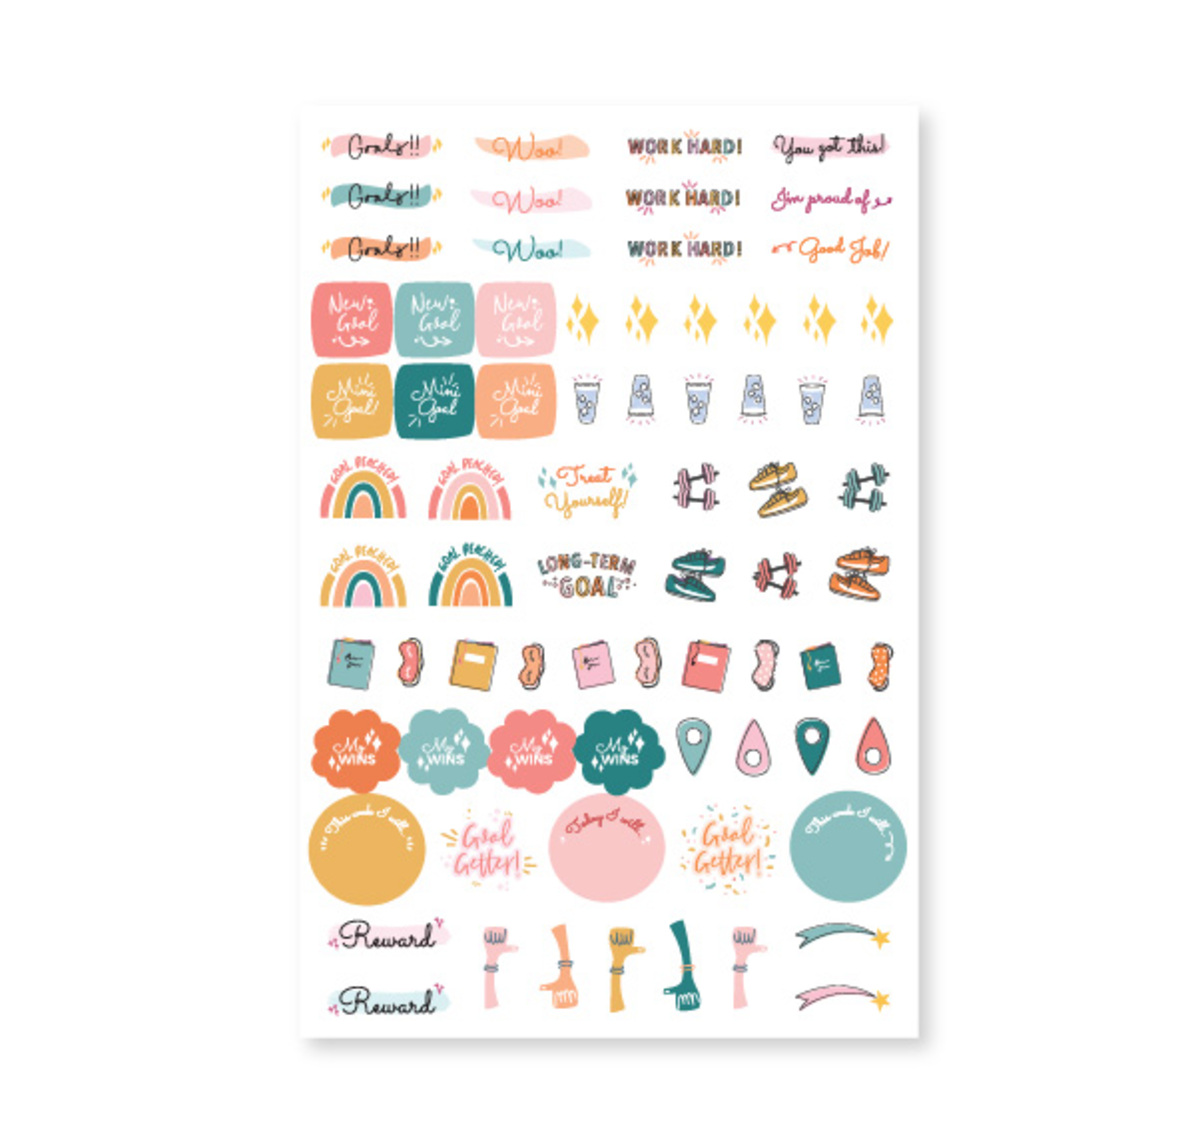 The paper studio sticker set Joyful oasis 15 different sheets of stickers  Foil accents on some stickers Material is a mix of paper and…